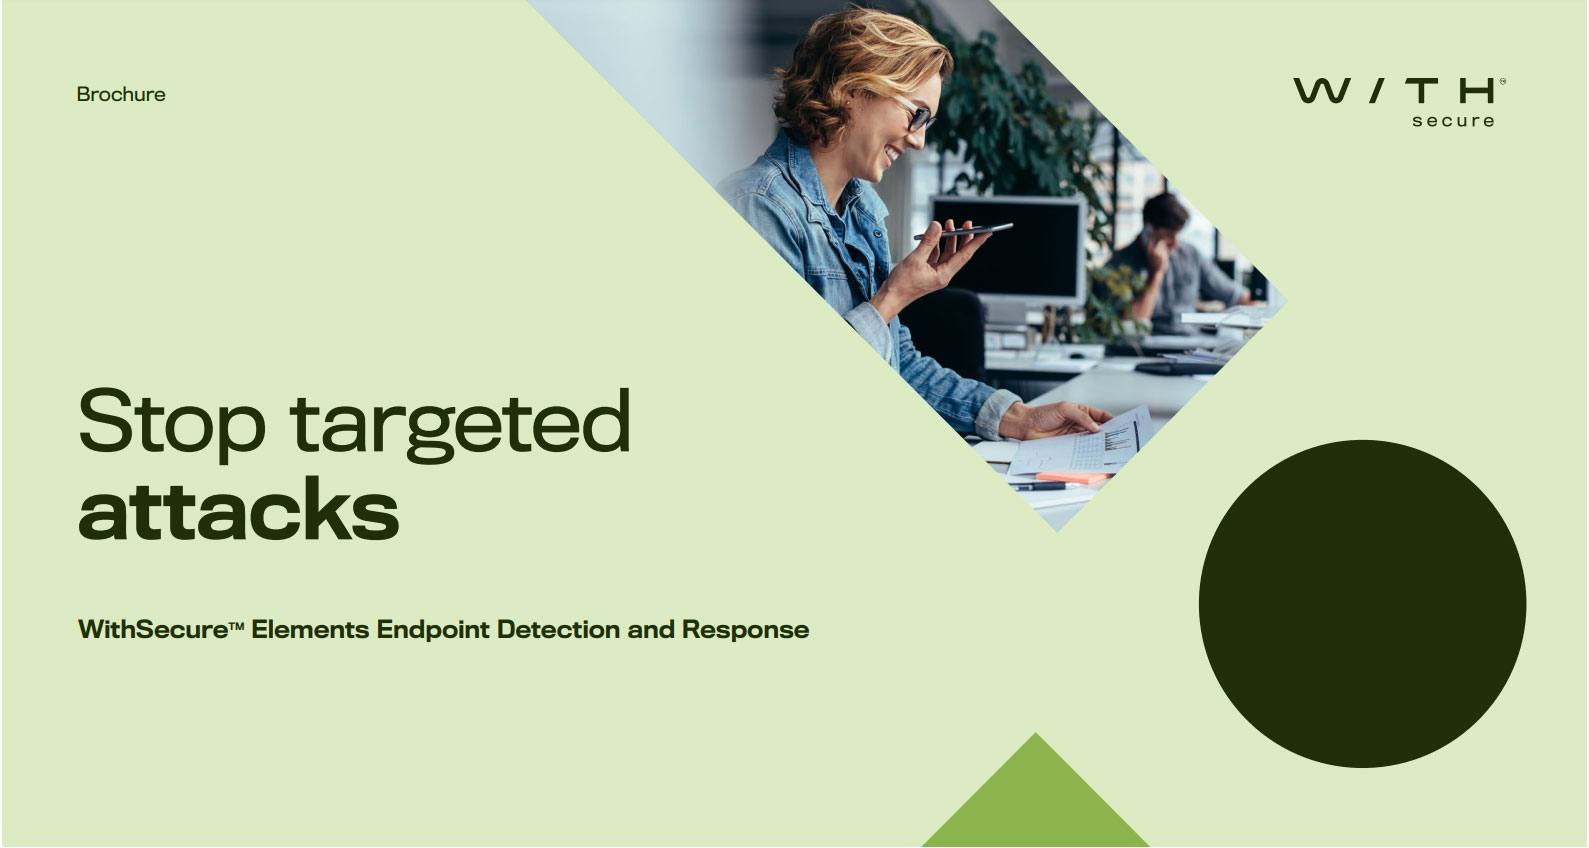 WS_endpoint_detection_and_response_brochure_EN